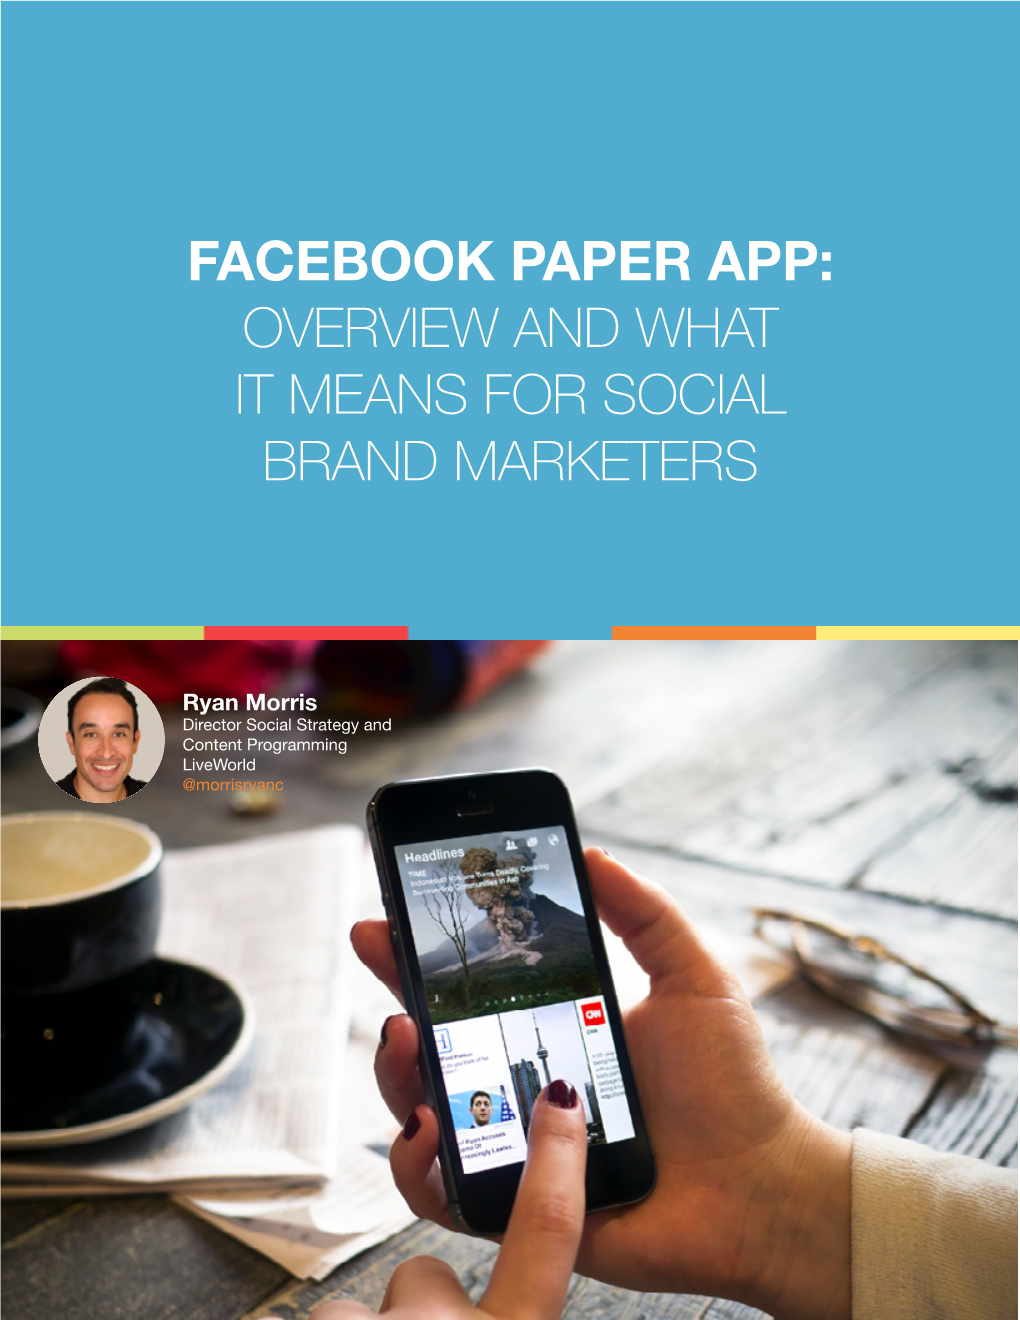 Facebook Paper App: Overview and What It Means for Social Brand Marketers